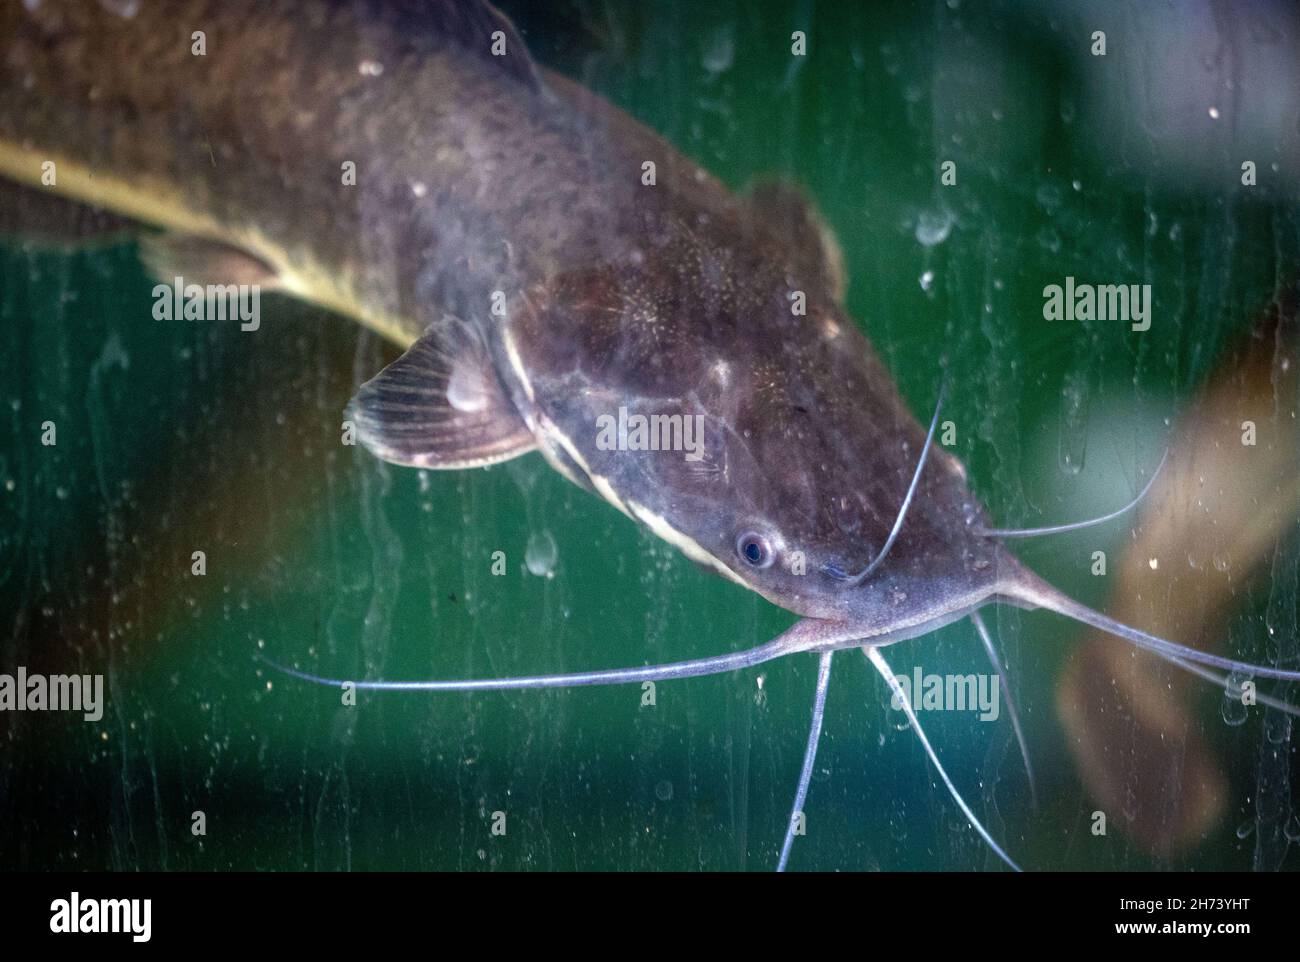 Rostock, Germany. 18th Oct, 2021. African catfish swim in a water basin in  a research facility for aquaculture at the Faculty of Agricultural and  Environmental Sciences at the University of Rostock. In